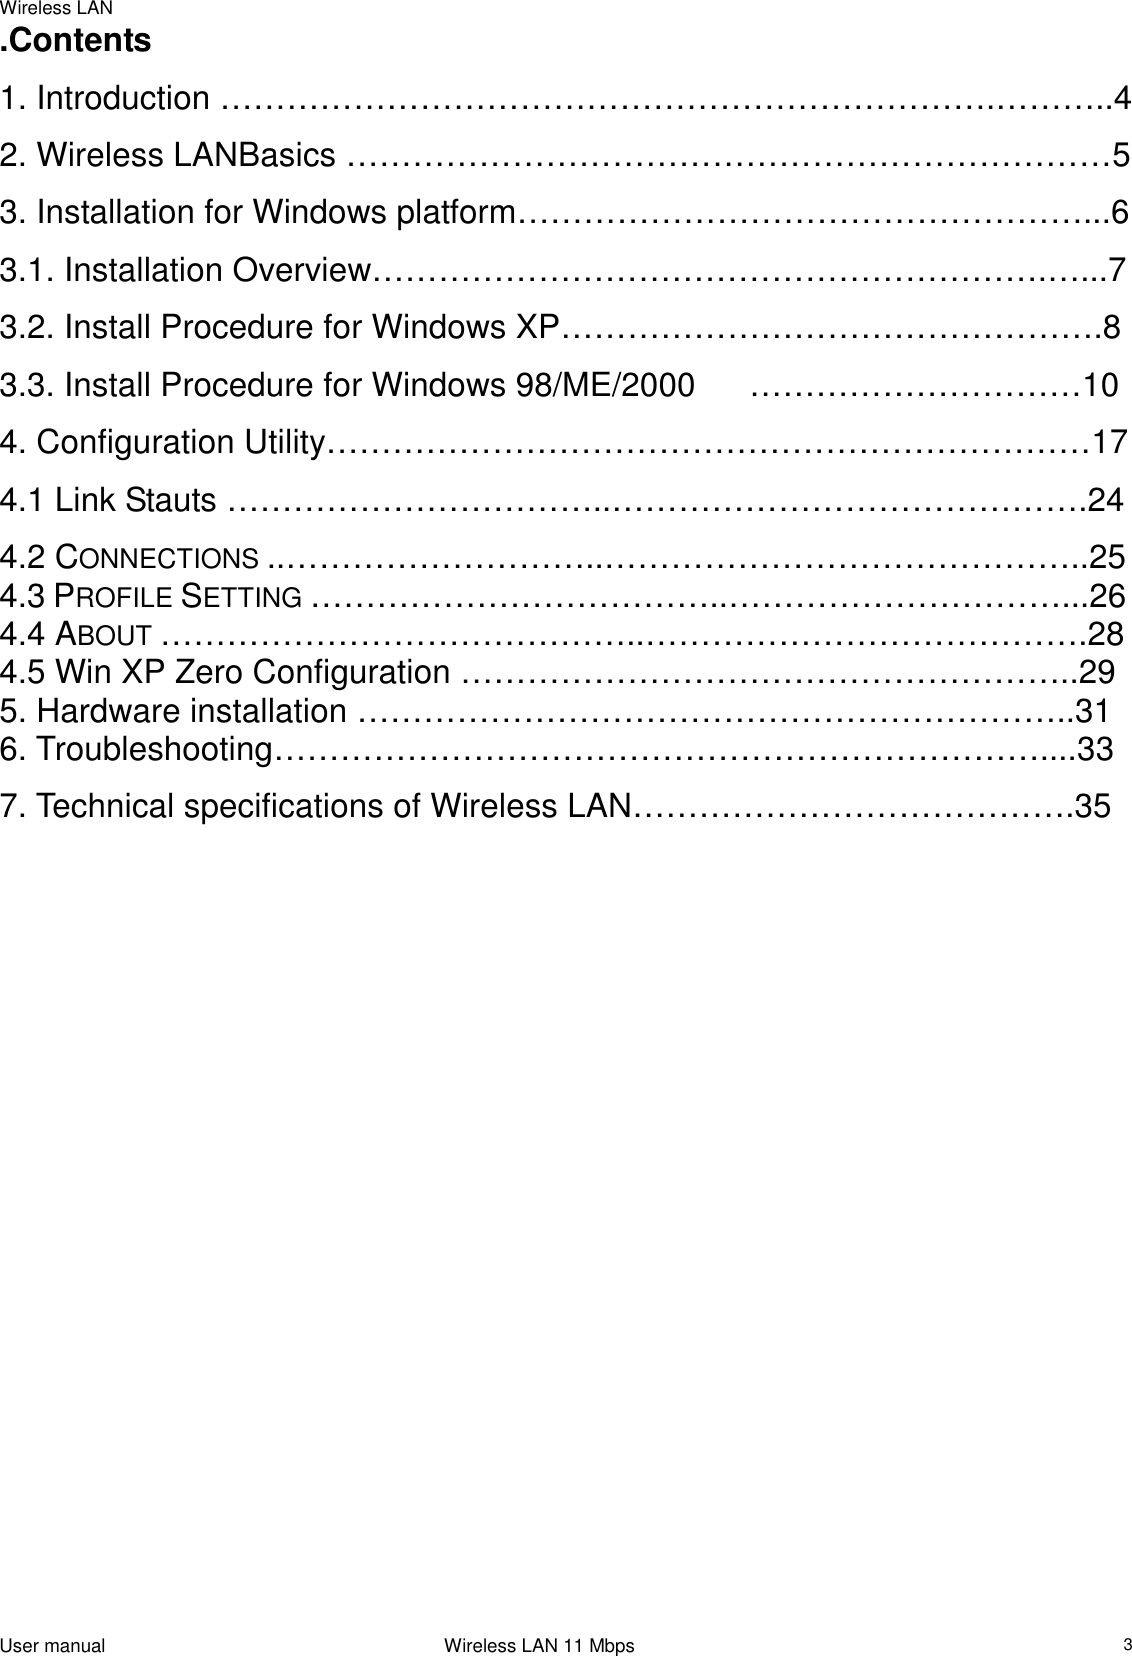 Wireless LANUser manual                                                                 Wireless LAN 11 Mbps3.Contents1. Introduction …………………………………………………………….………..42. Wireless LANBasics ……………………………………………………………53. Installation for Windows platform……………………………………………...63.1. Installation Overview…………………………………………………….…...73.2. Install Procedure for Windows XP………………………………………….83.3. Install Procedure for Windows 98/ME/2000 …………………………104. Configuration Utility……………………………………………………………174.1 Link Stauts ……………………………..…………………………………….244.2 CONNECTIONS ..………………………..……………………………………..254.3 PROFILE SETTING ………………………………..…………………………...264.4 ABOUT ……………………………………..………………………………….284.5 Win XP Zero Configuration ………………………………………………..295. Hardware installation ………………………………………………………..316. Troubleshooting……………………………………………………………....337. Technical specifications of Wireless LAN………………………………….35